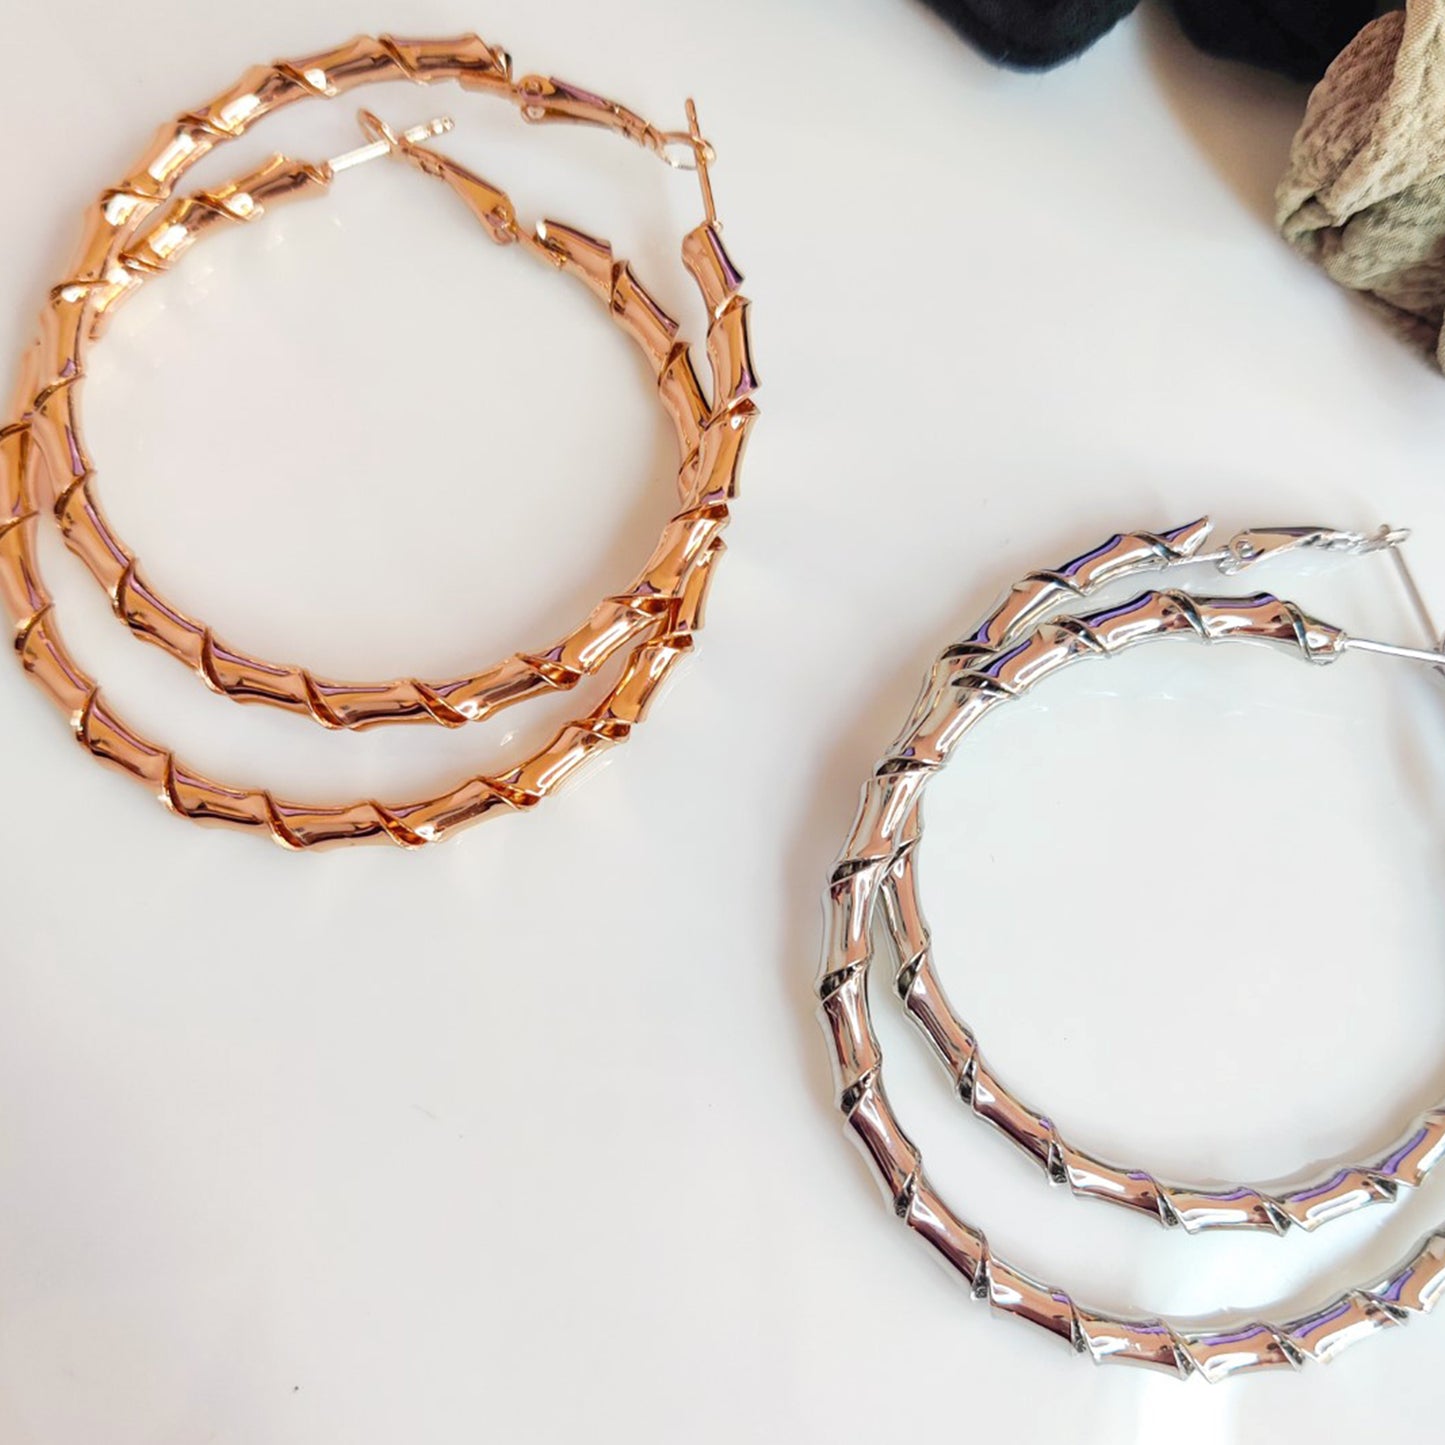 Curled Ribbon Hoops